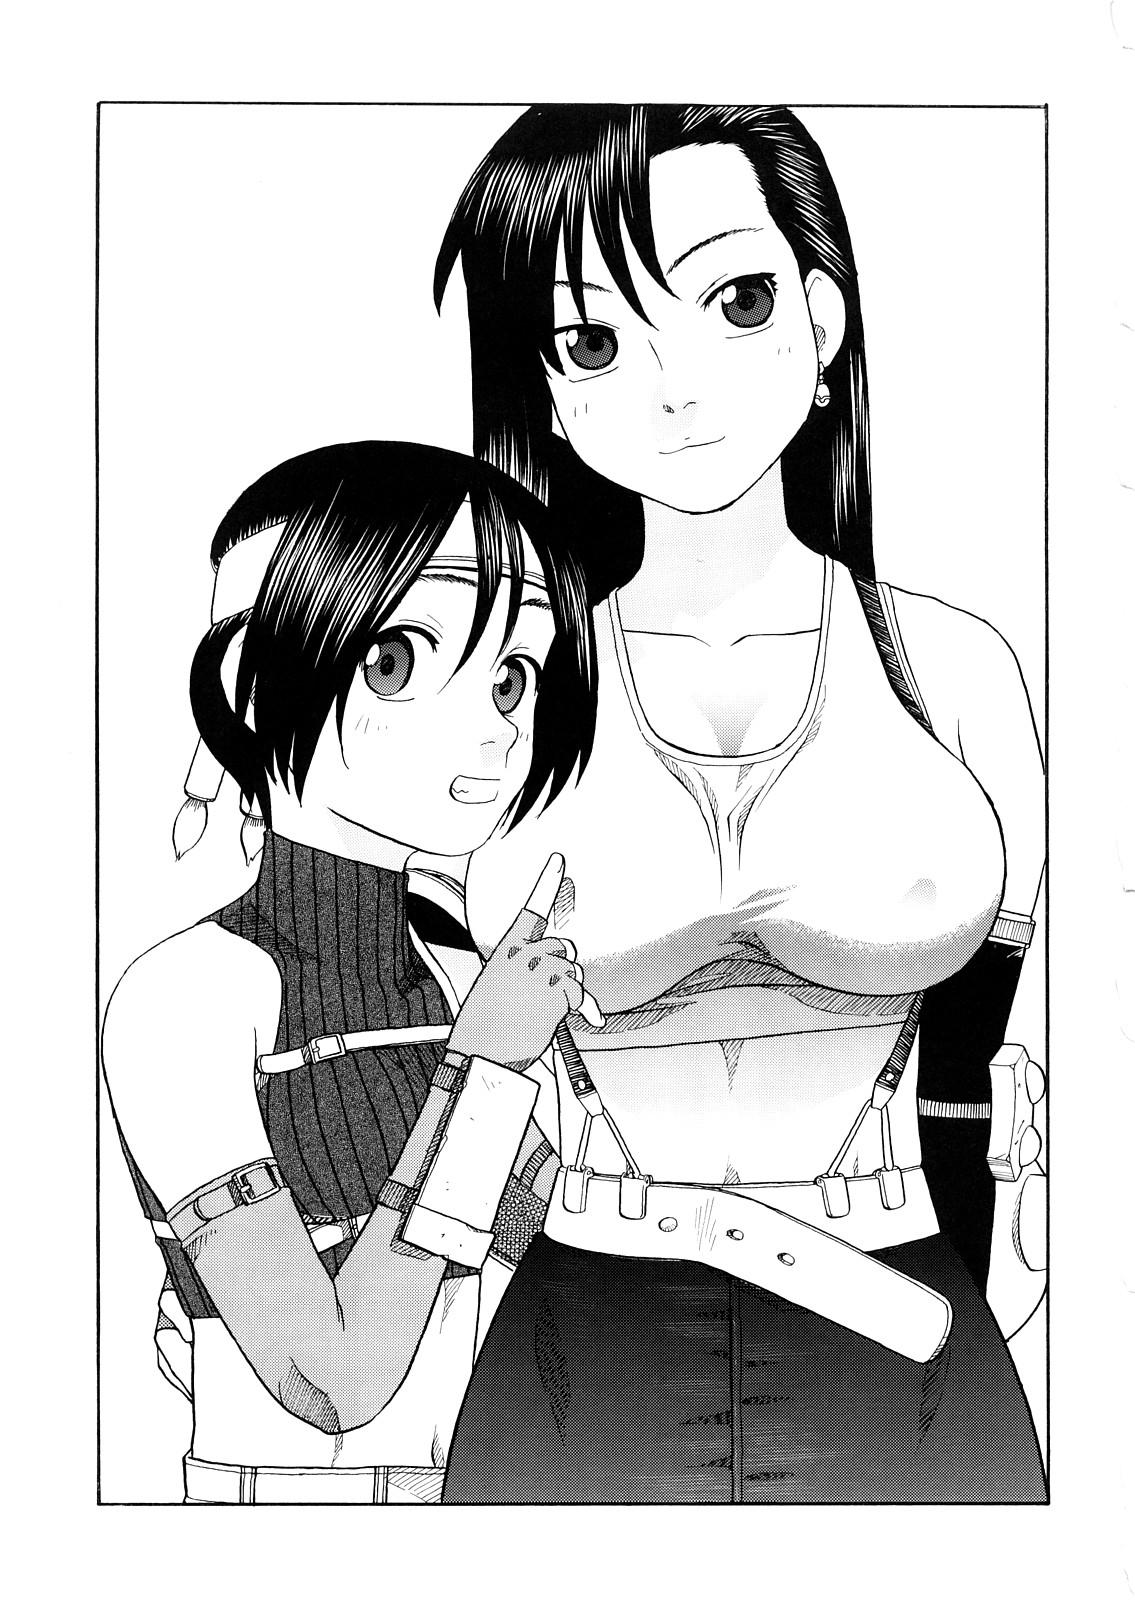 Big Natural Tits Tifa to Yuffie to Yojouhan - Final fantasy vii Neighbor - Page 2